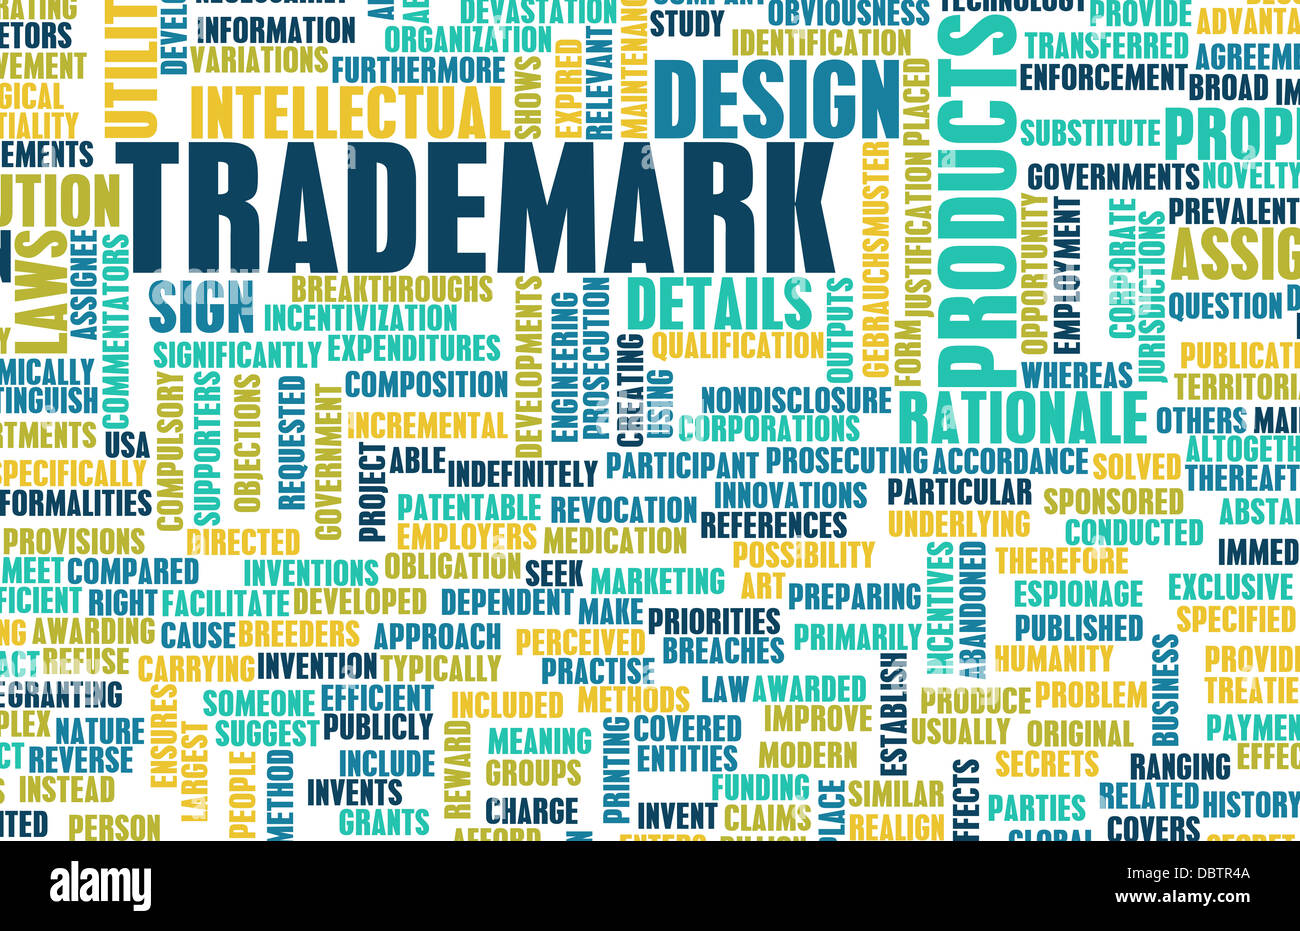 Trademark Design and Ownership Rights as Abstract Stock Photo